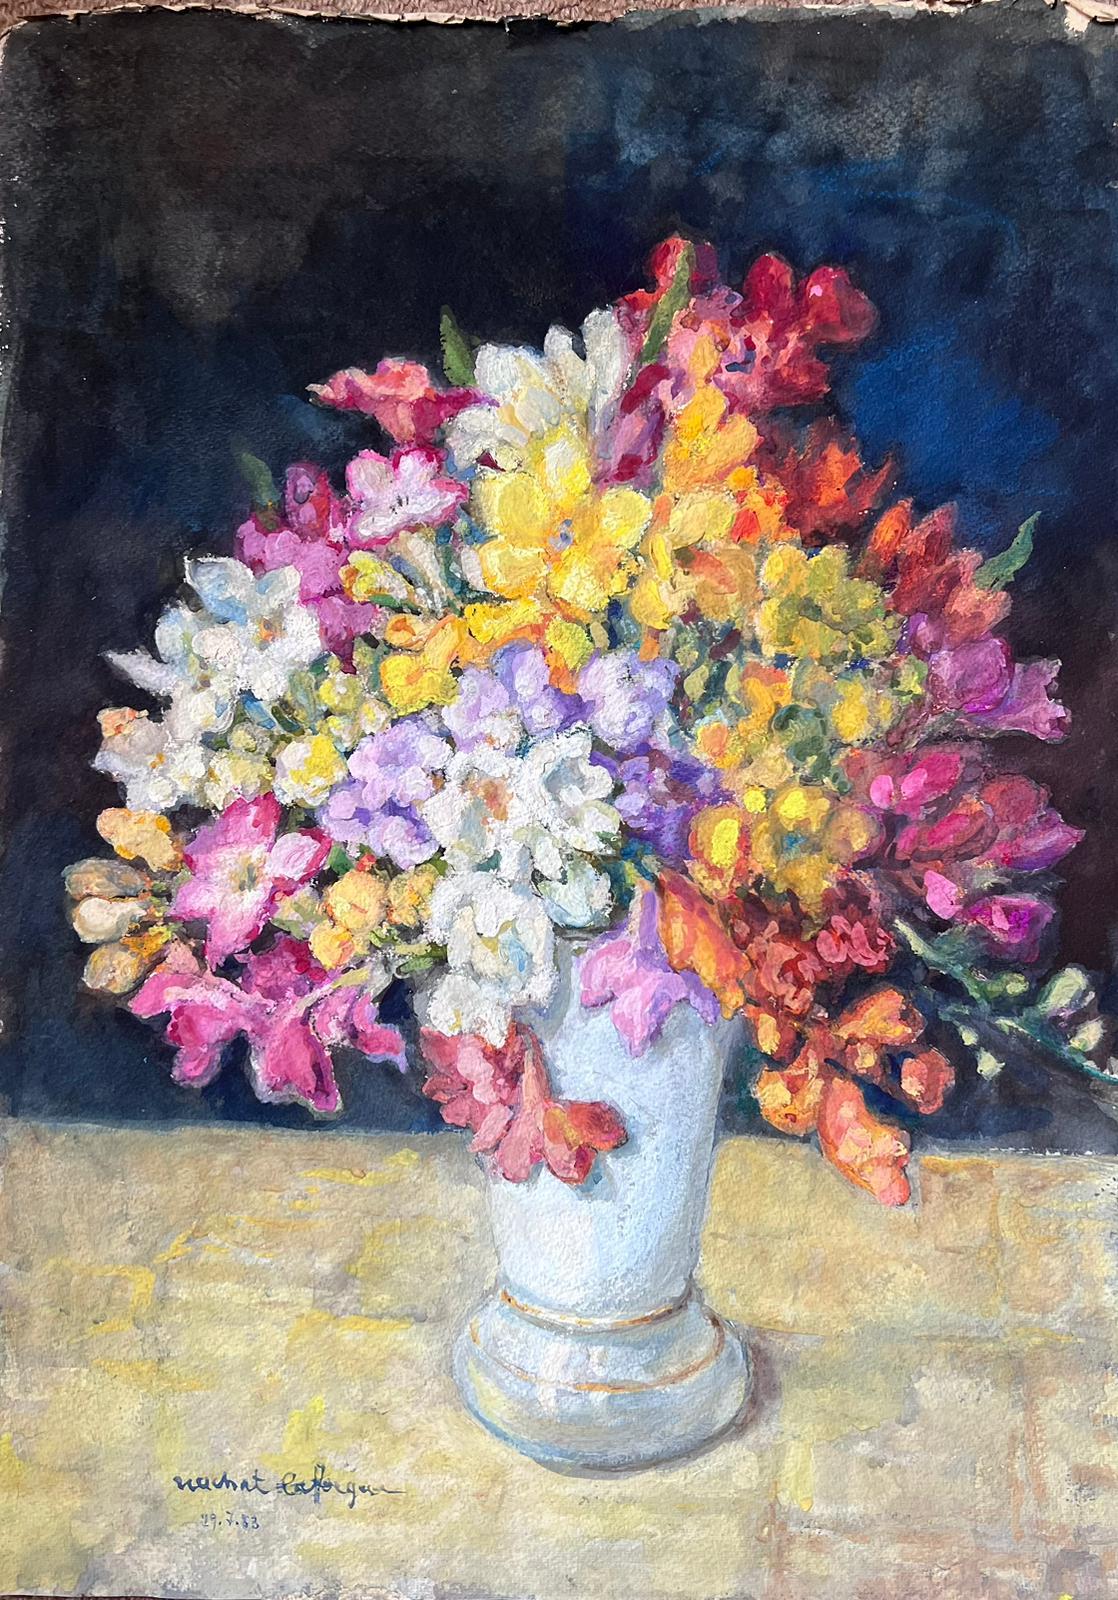 Bloom Floral Display Mid 20th Century French Post Impressionist Signed Painting For Sale 1